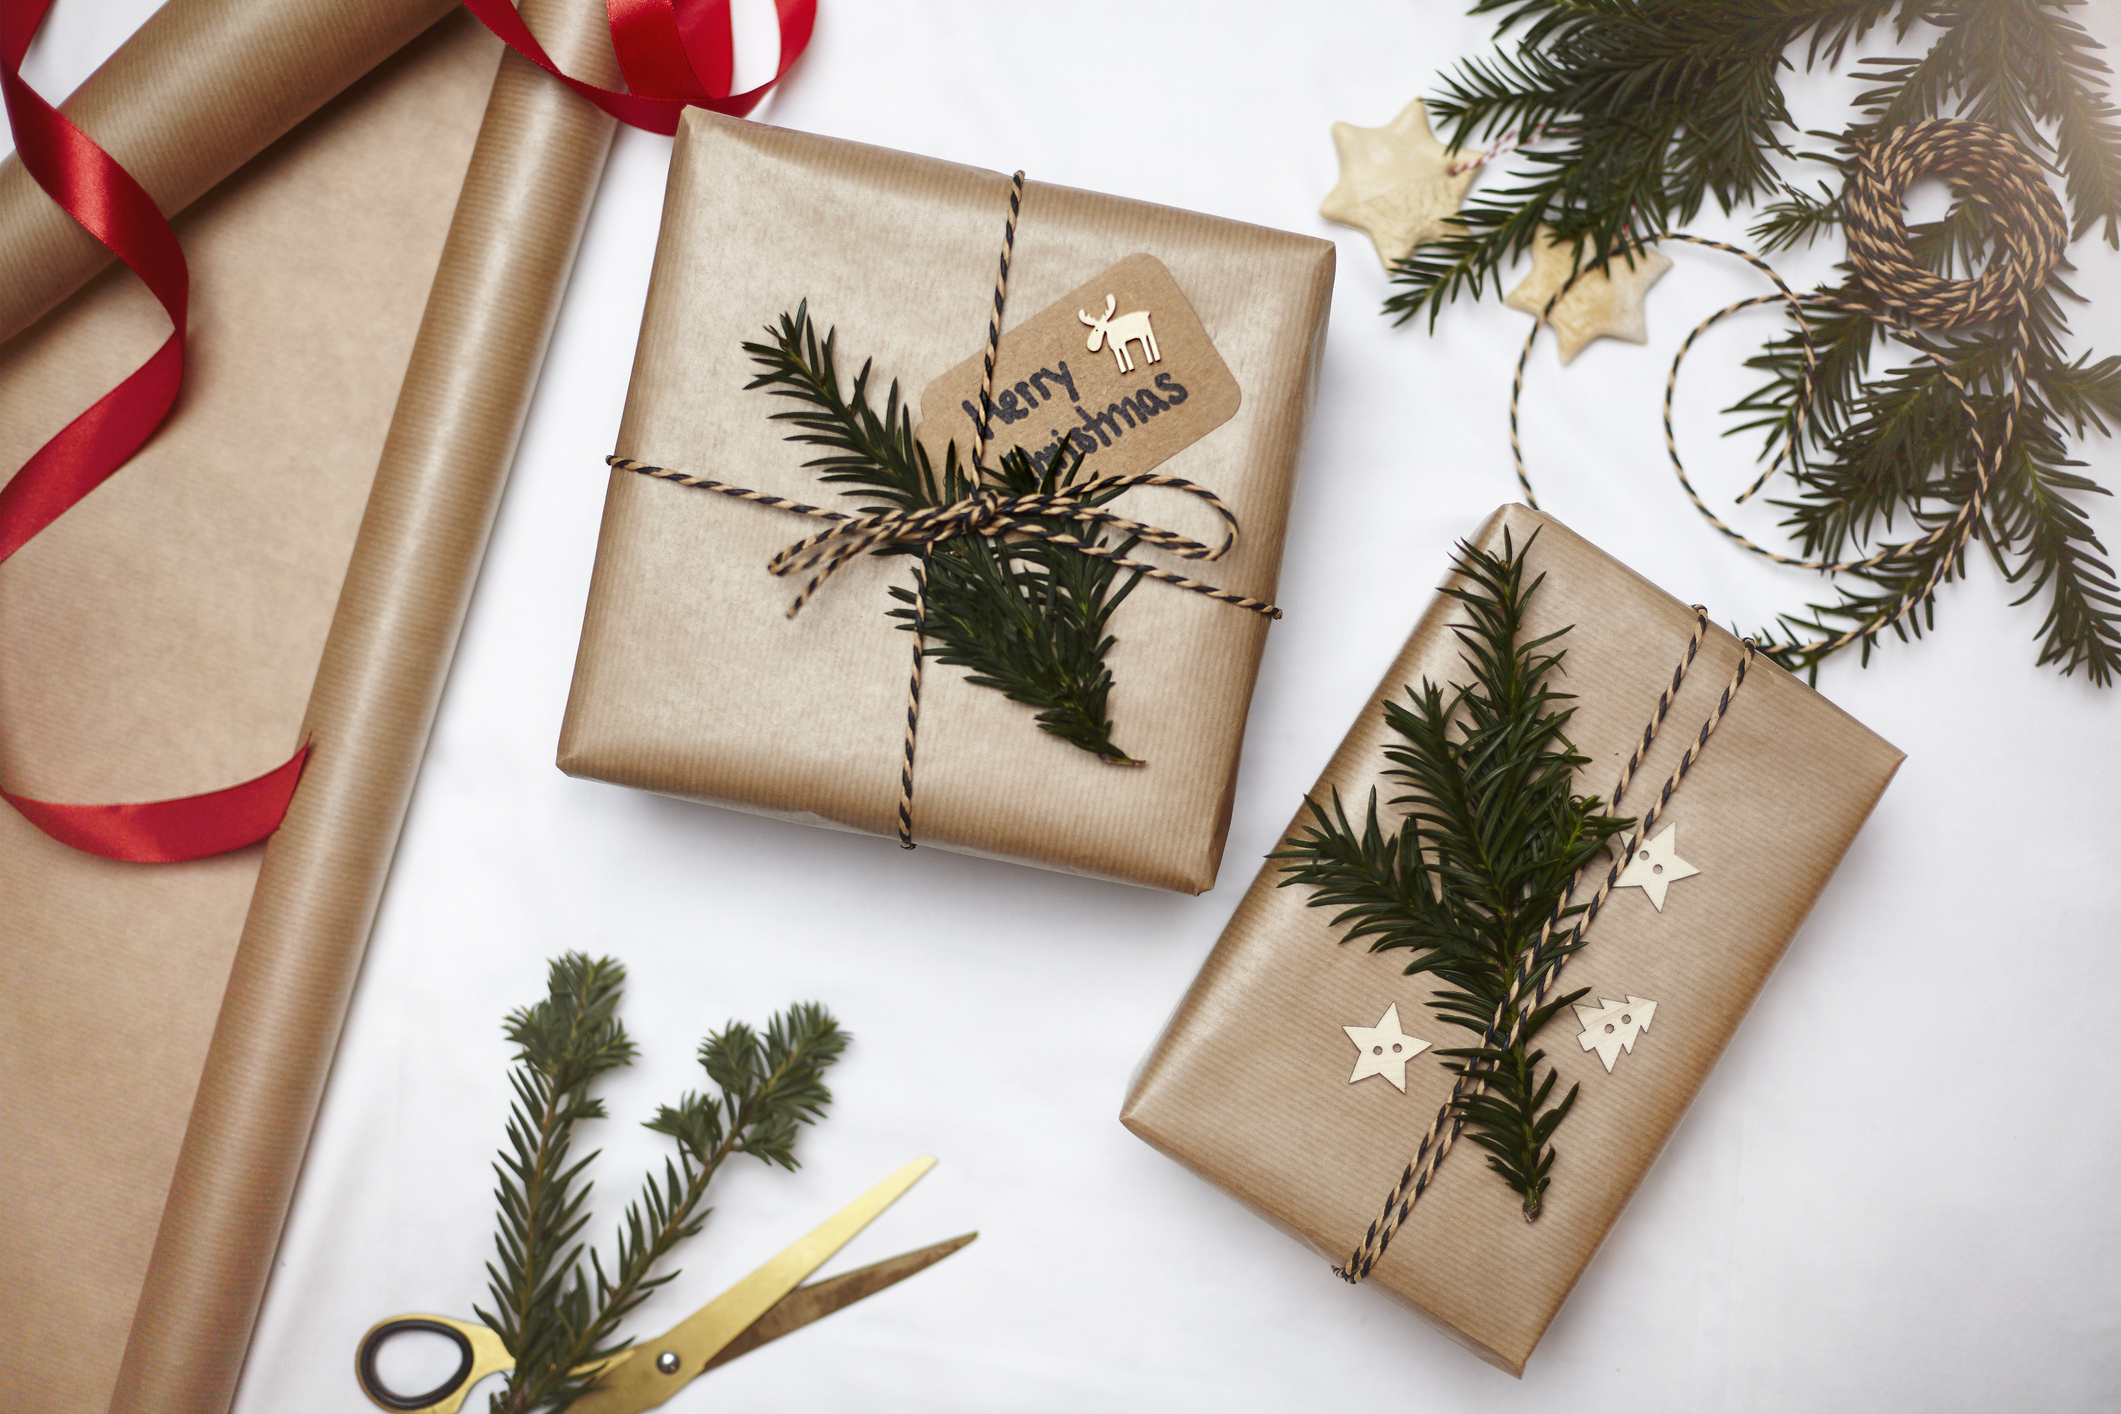 Christmas gifts wrapped in brown paper, decorated with fern and string, overhead view